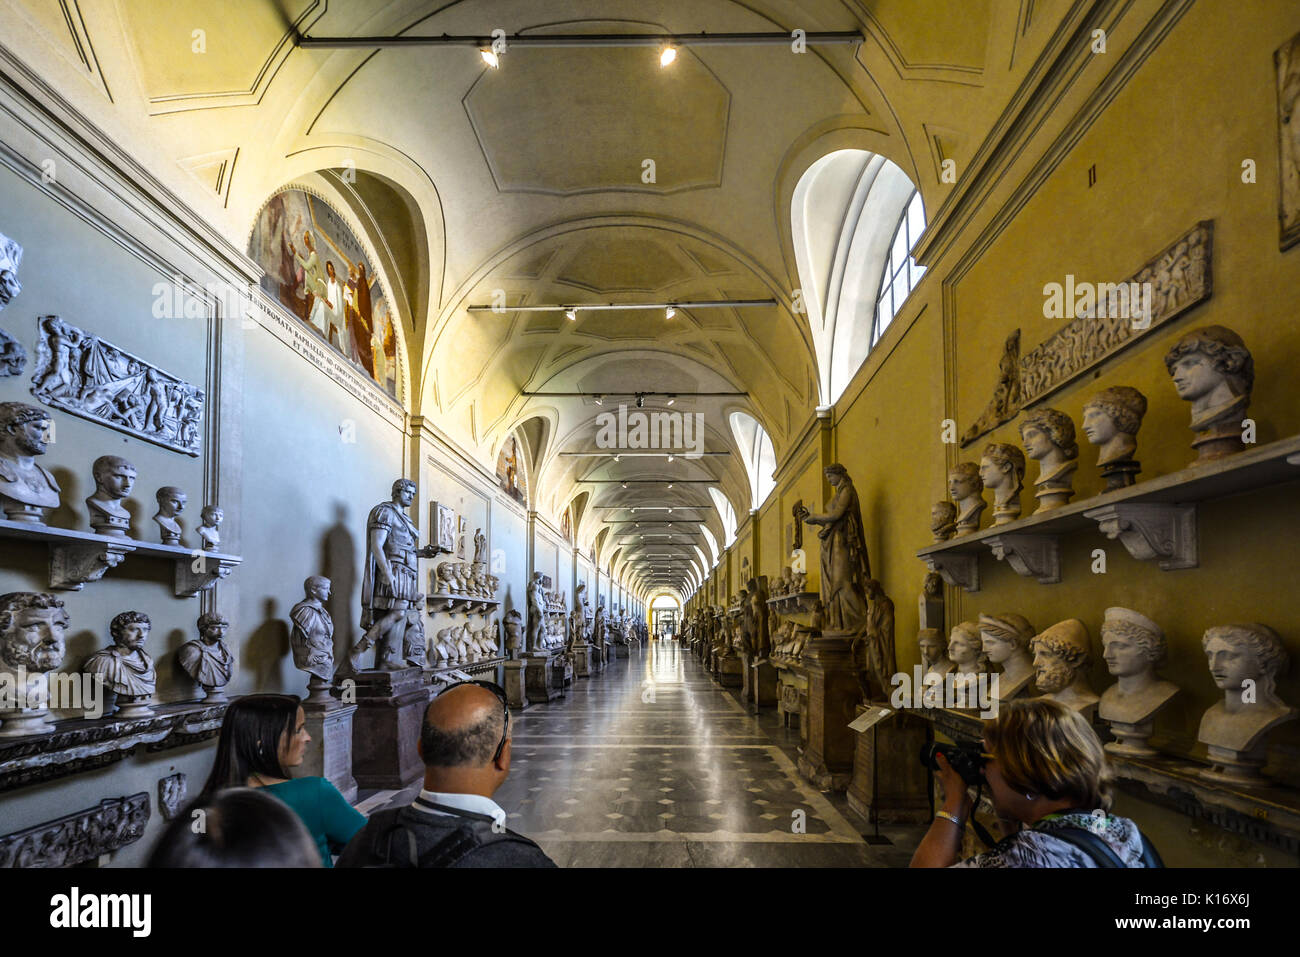 Inside the Vatican Museum and the long Hall of Statues featuring marble busts and ancient sculptures Stock Photo